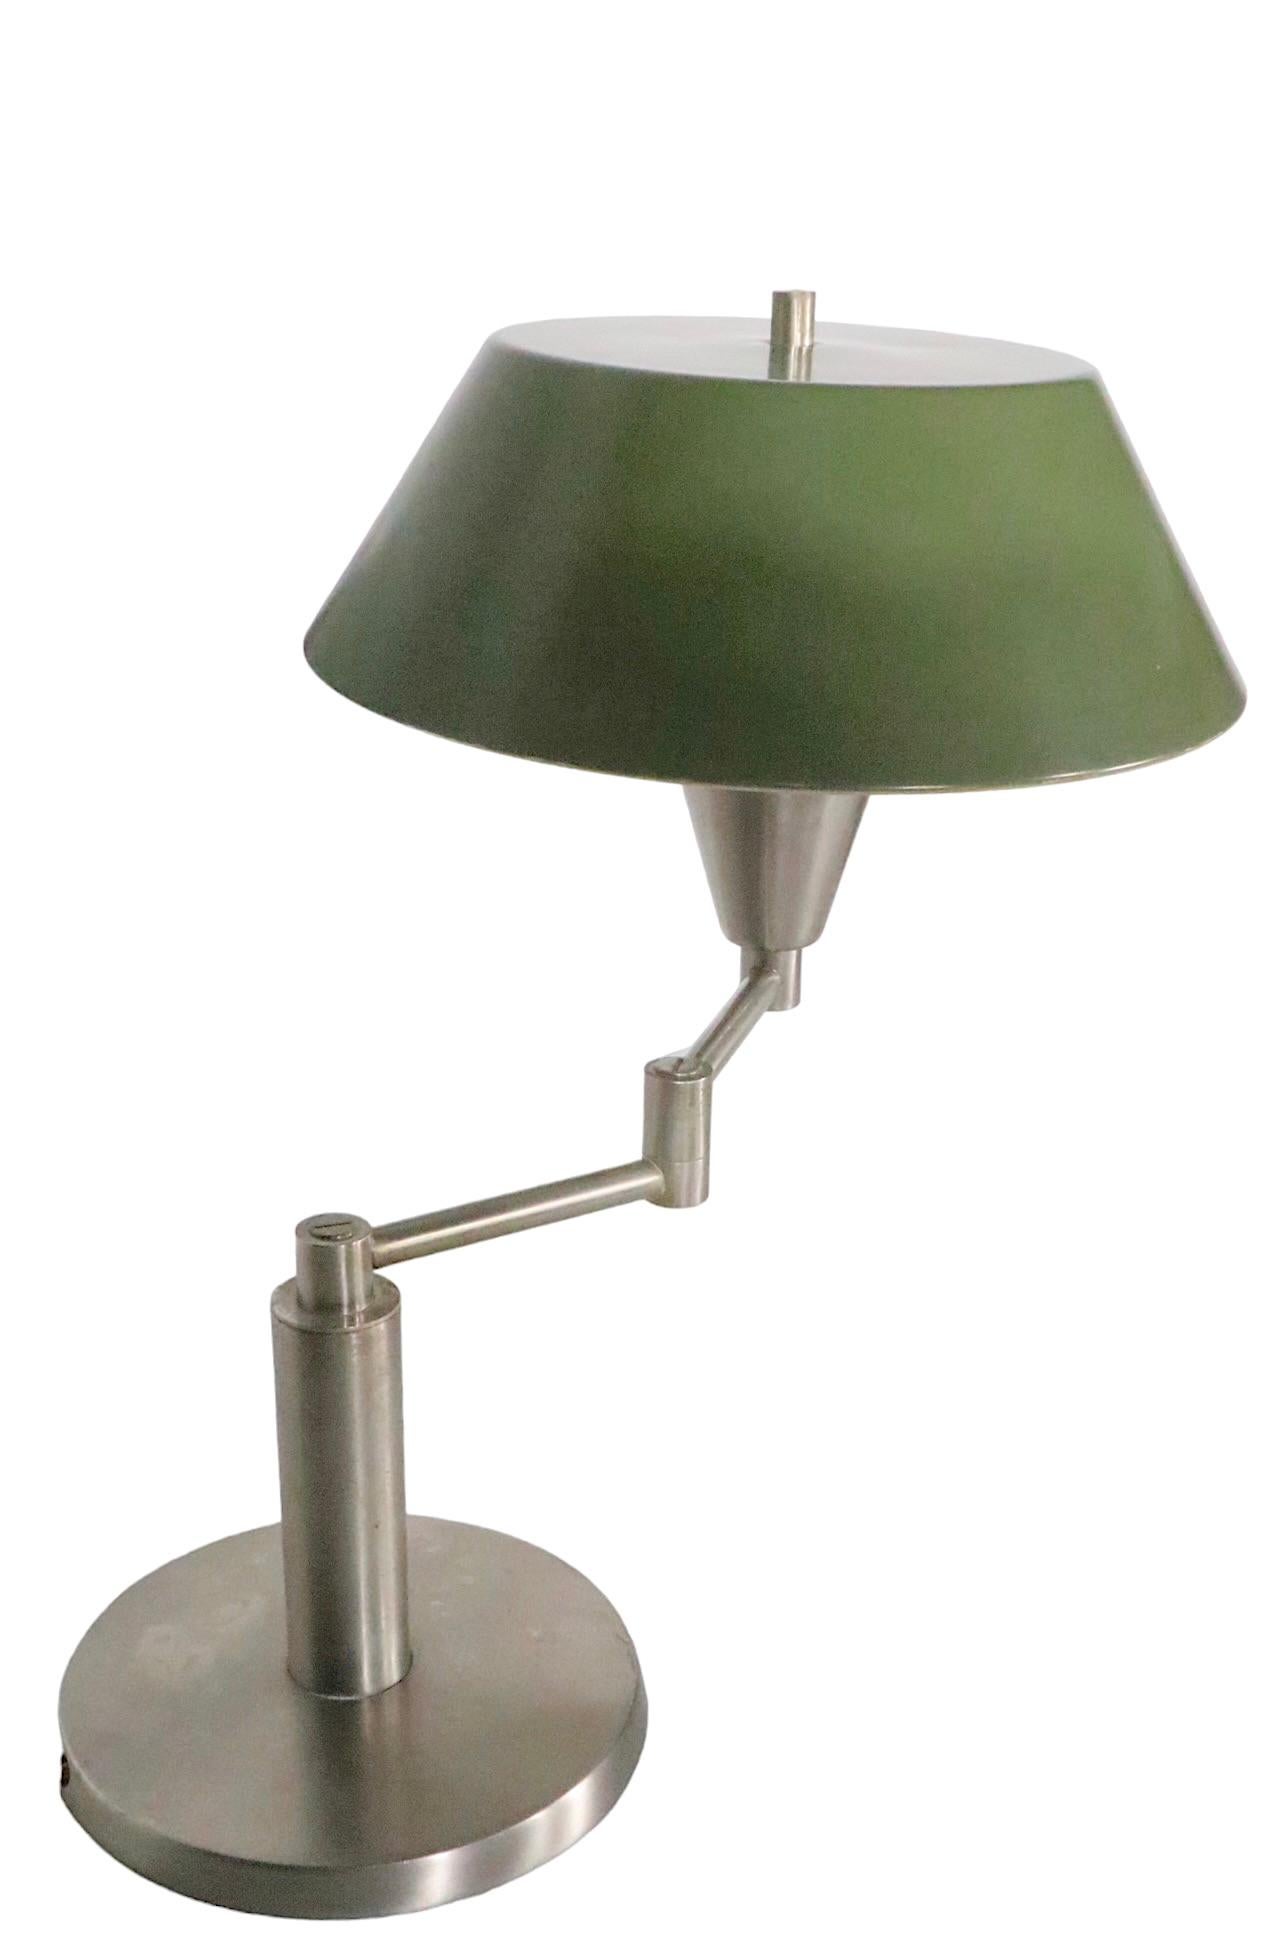 Iconic Walter Von Nessen Swing Arm Desk Lamp with Original Metal Shade For Sale 1